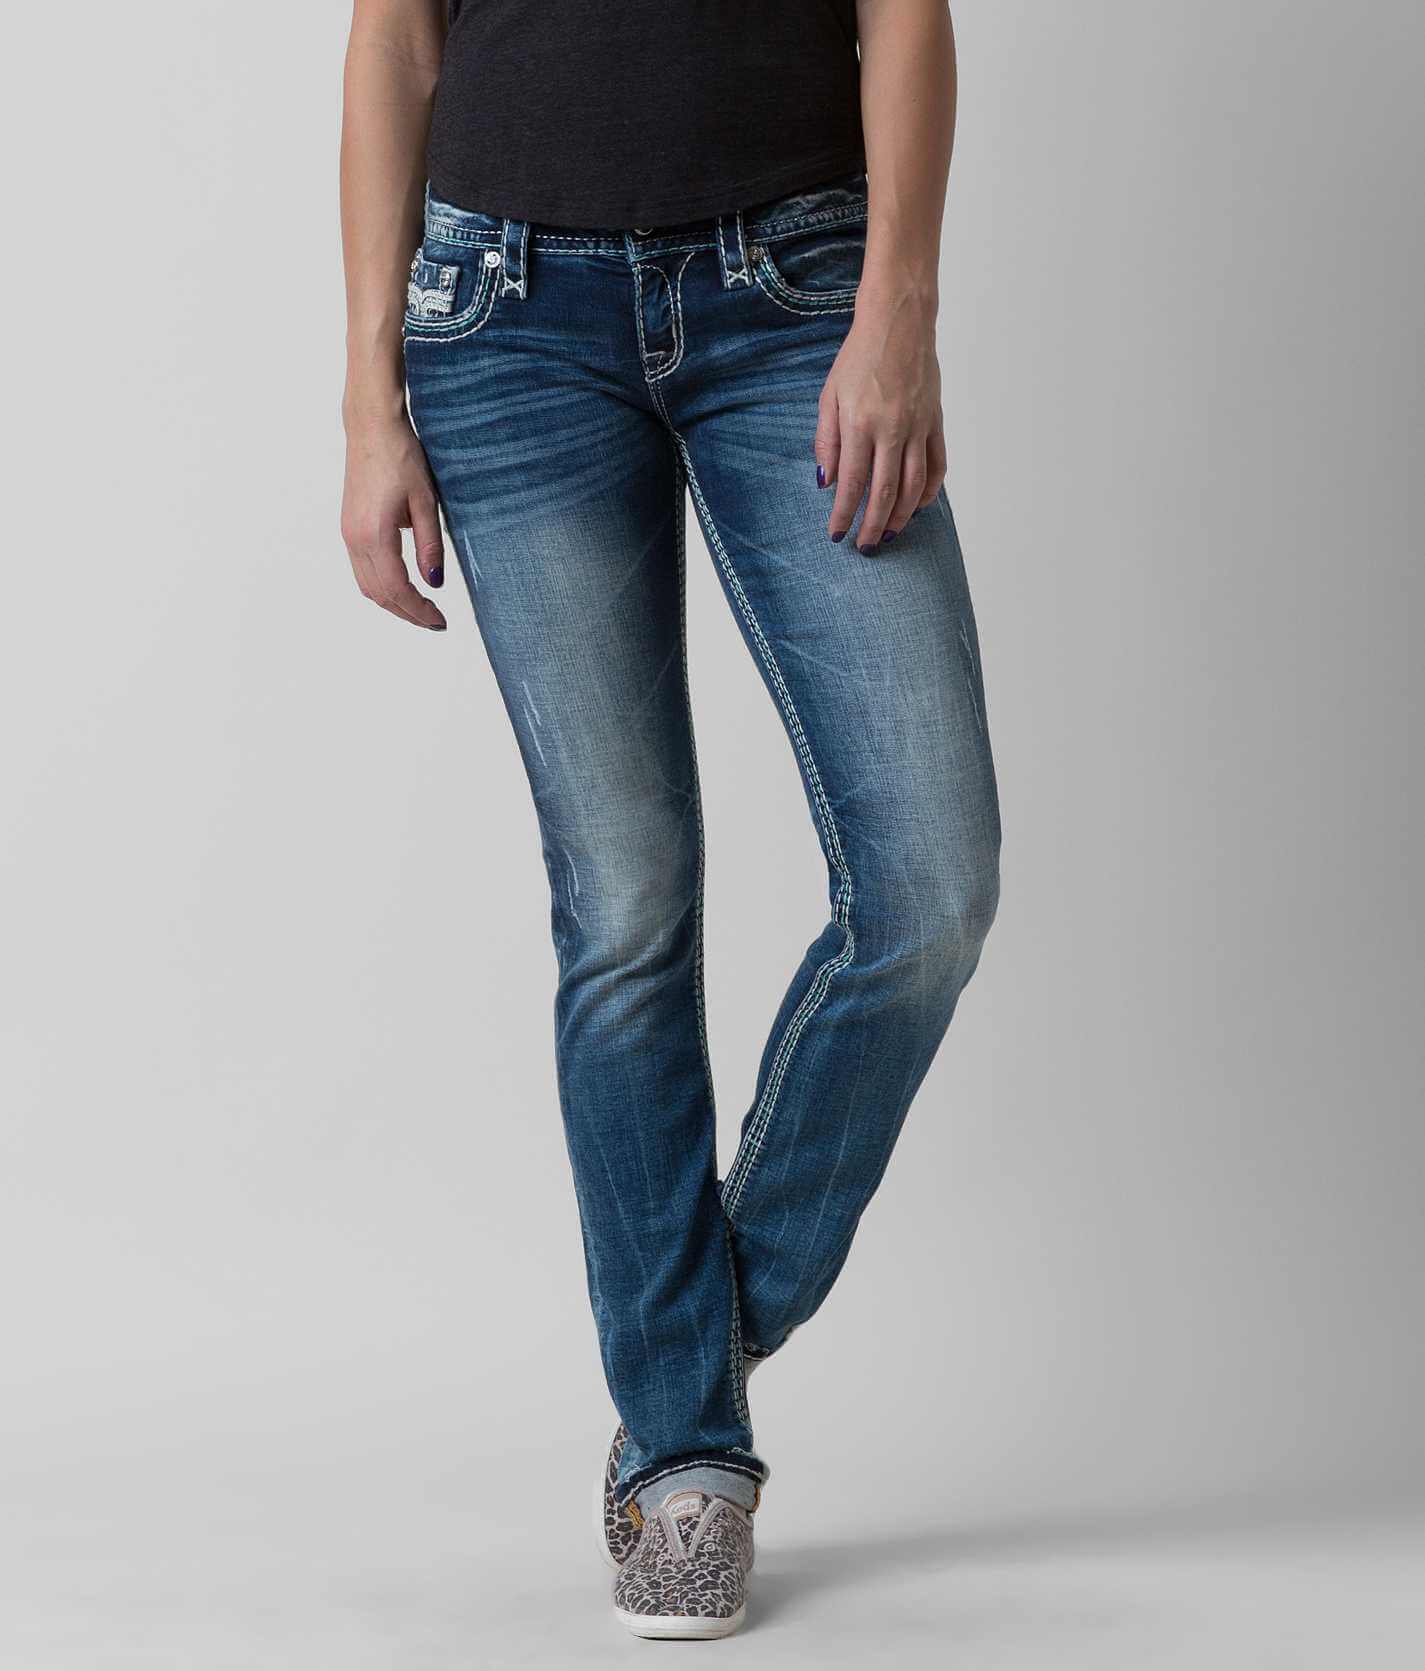 acne classic fit jeans